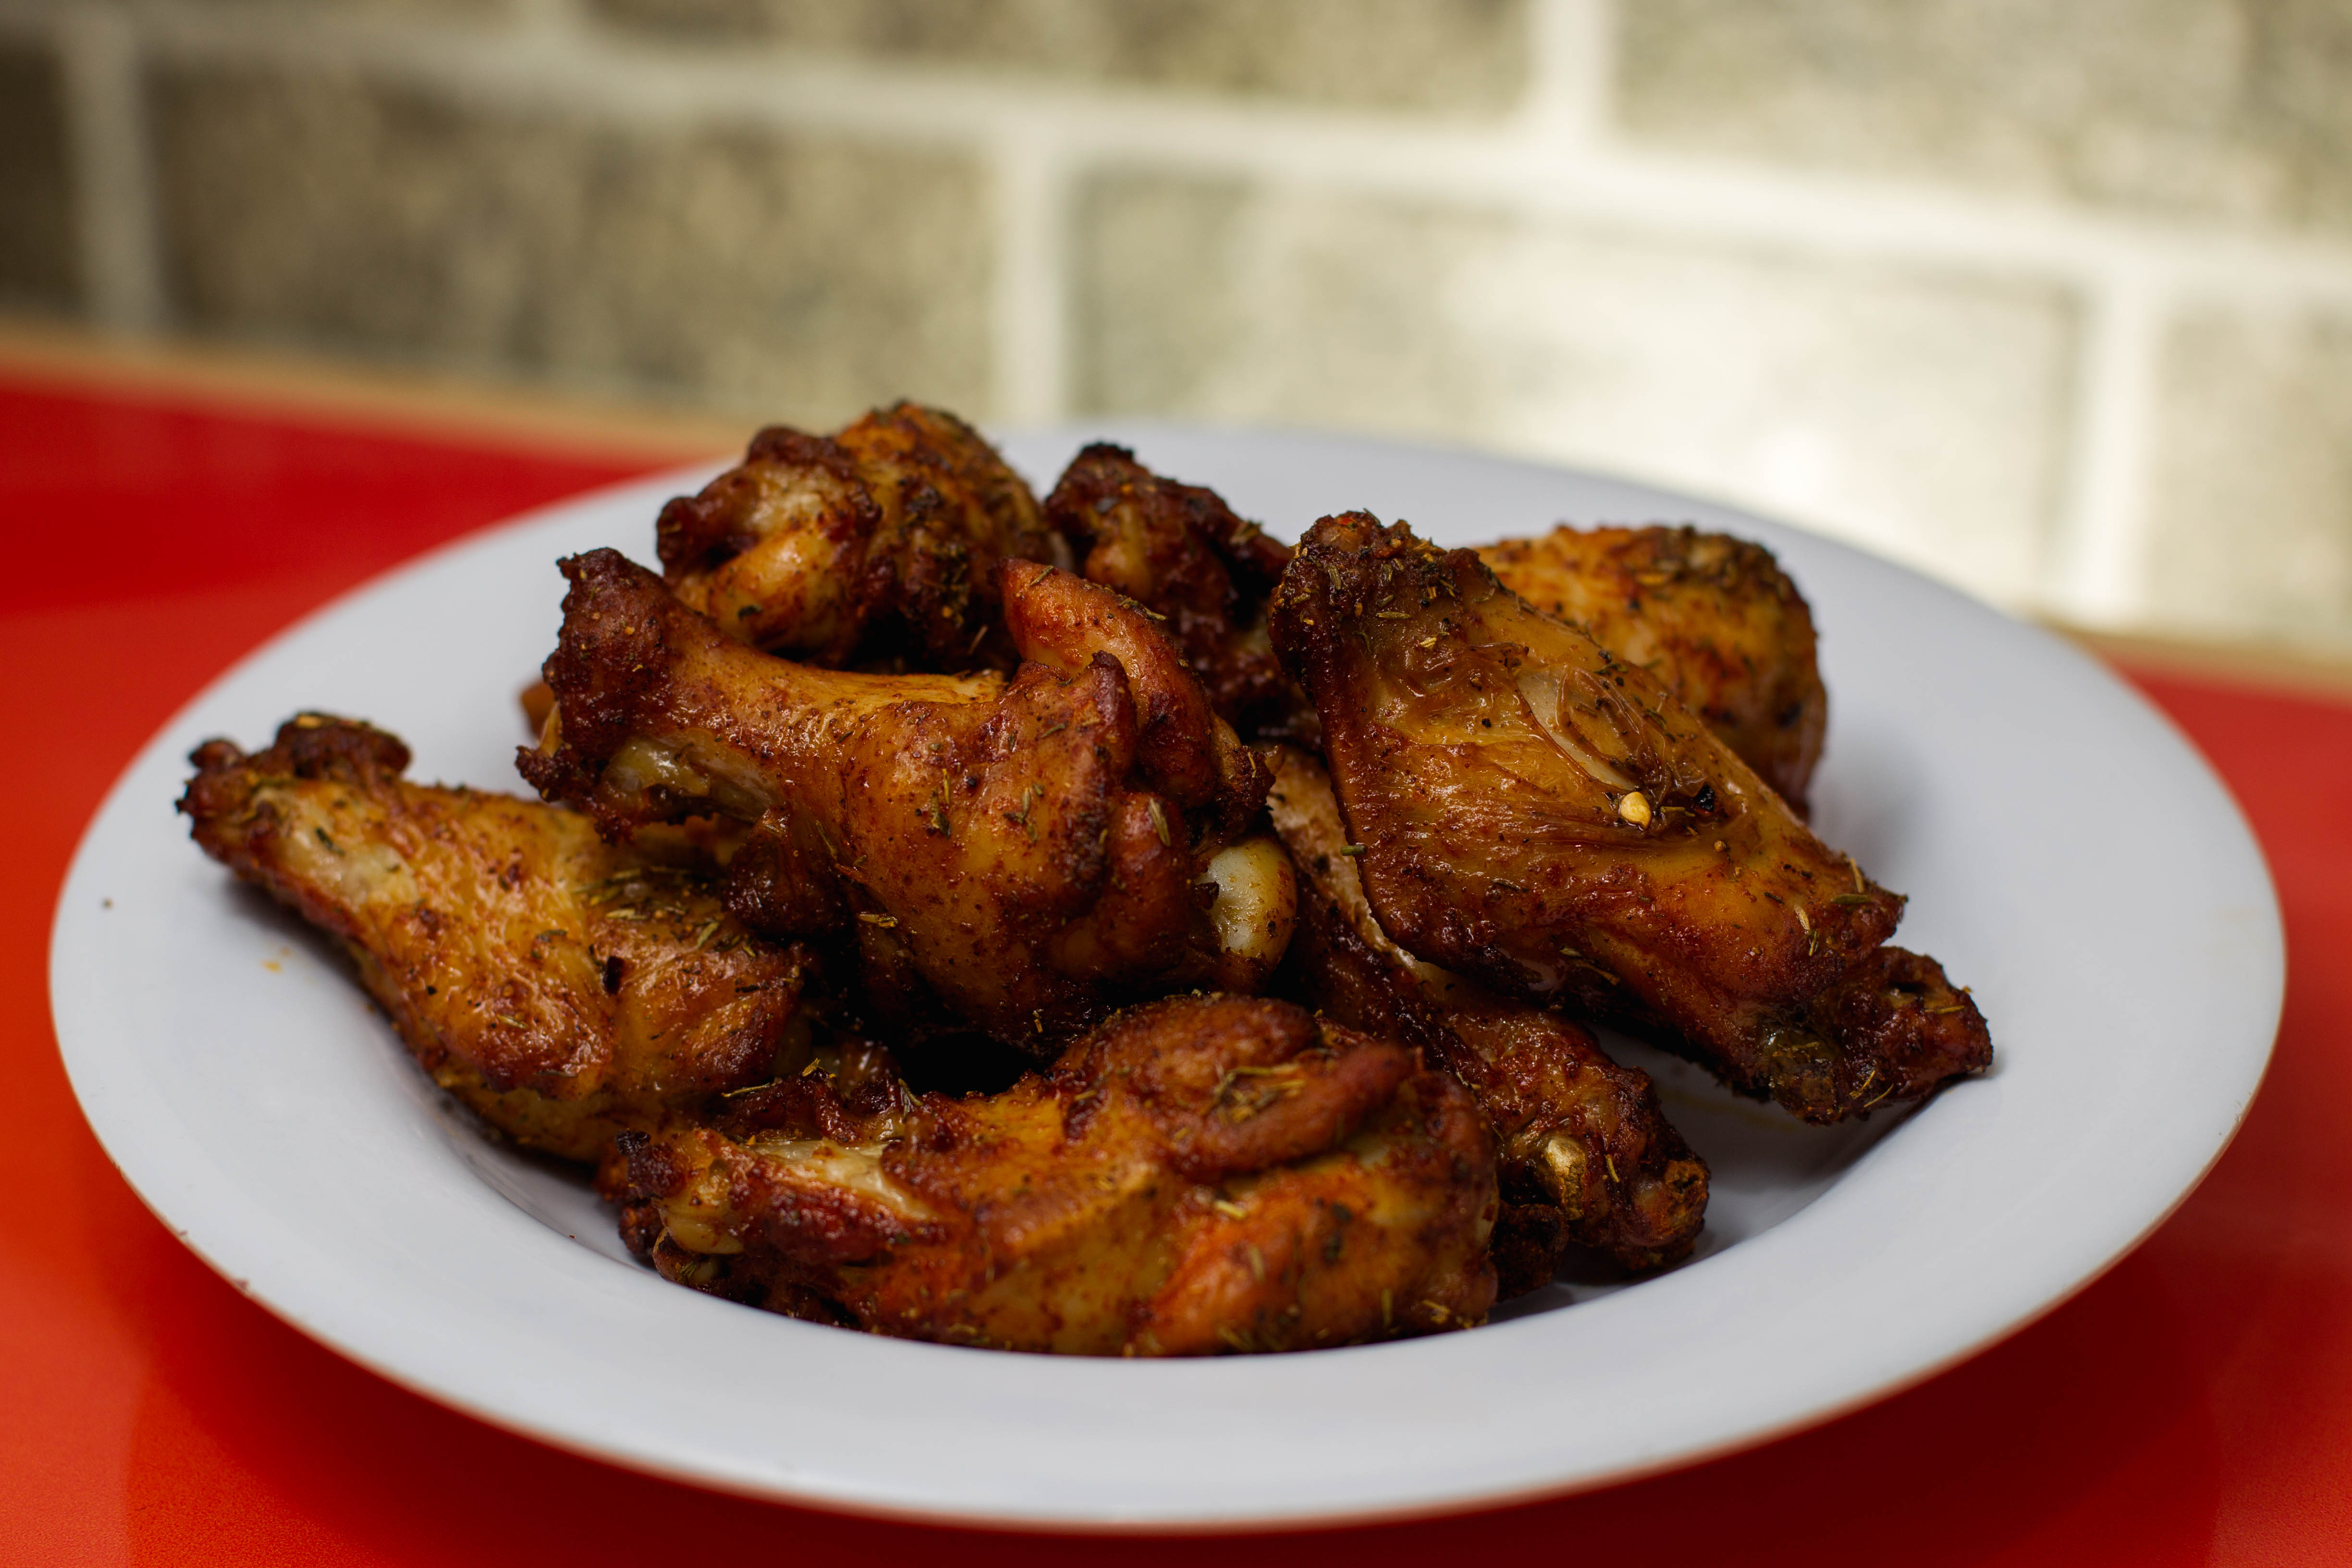 Wings secured the number one spot on the list of most popular foods delivered in 2018, and Hooters made the top 10 list of favorite chain restaurants.